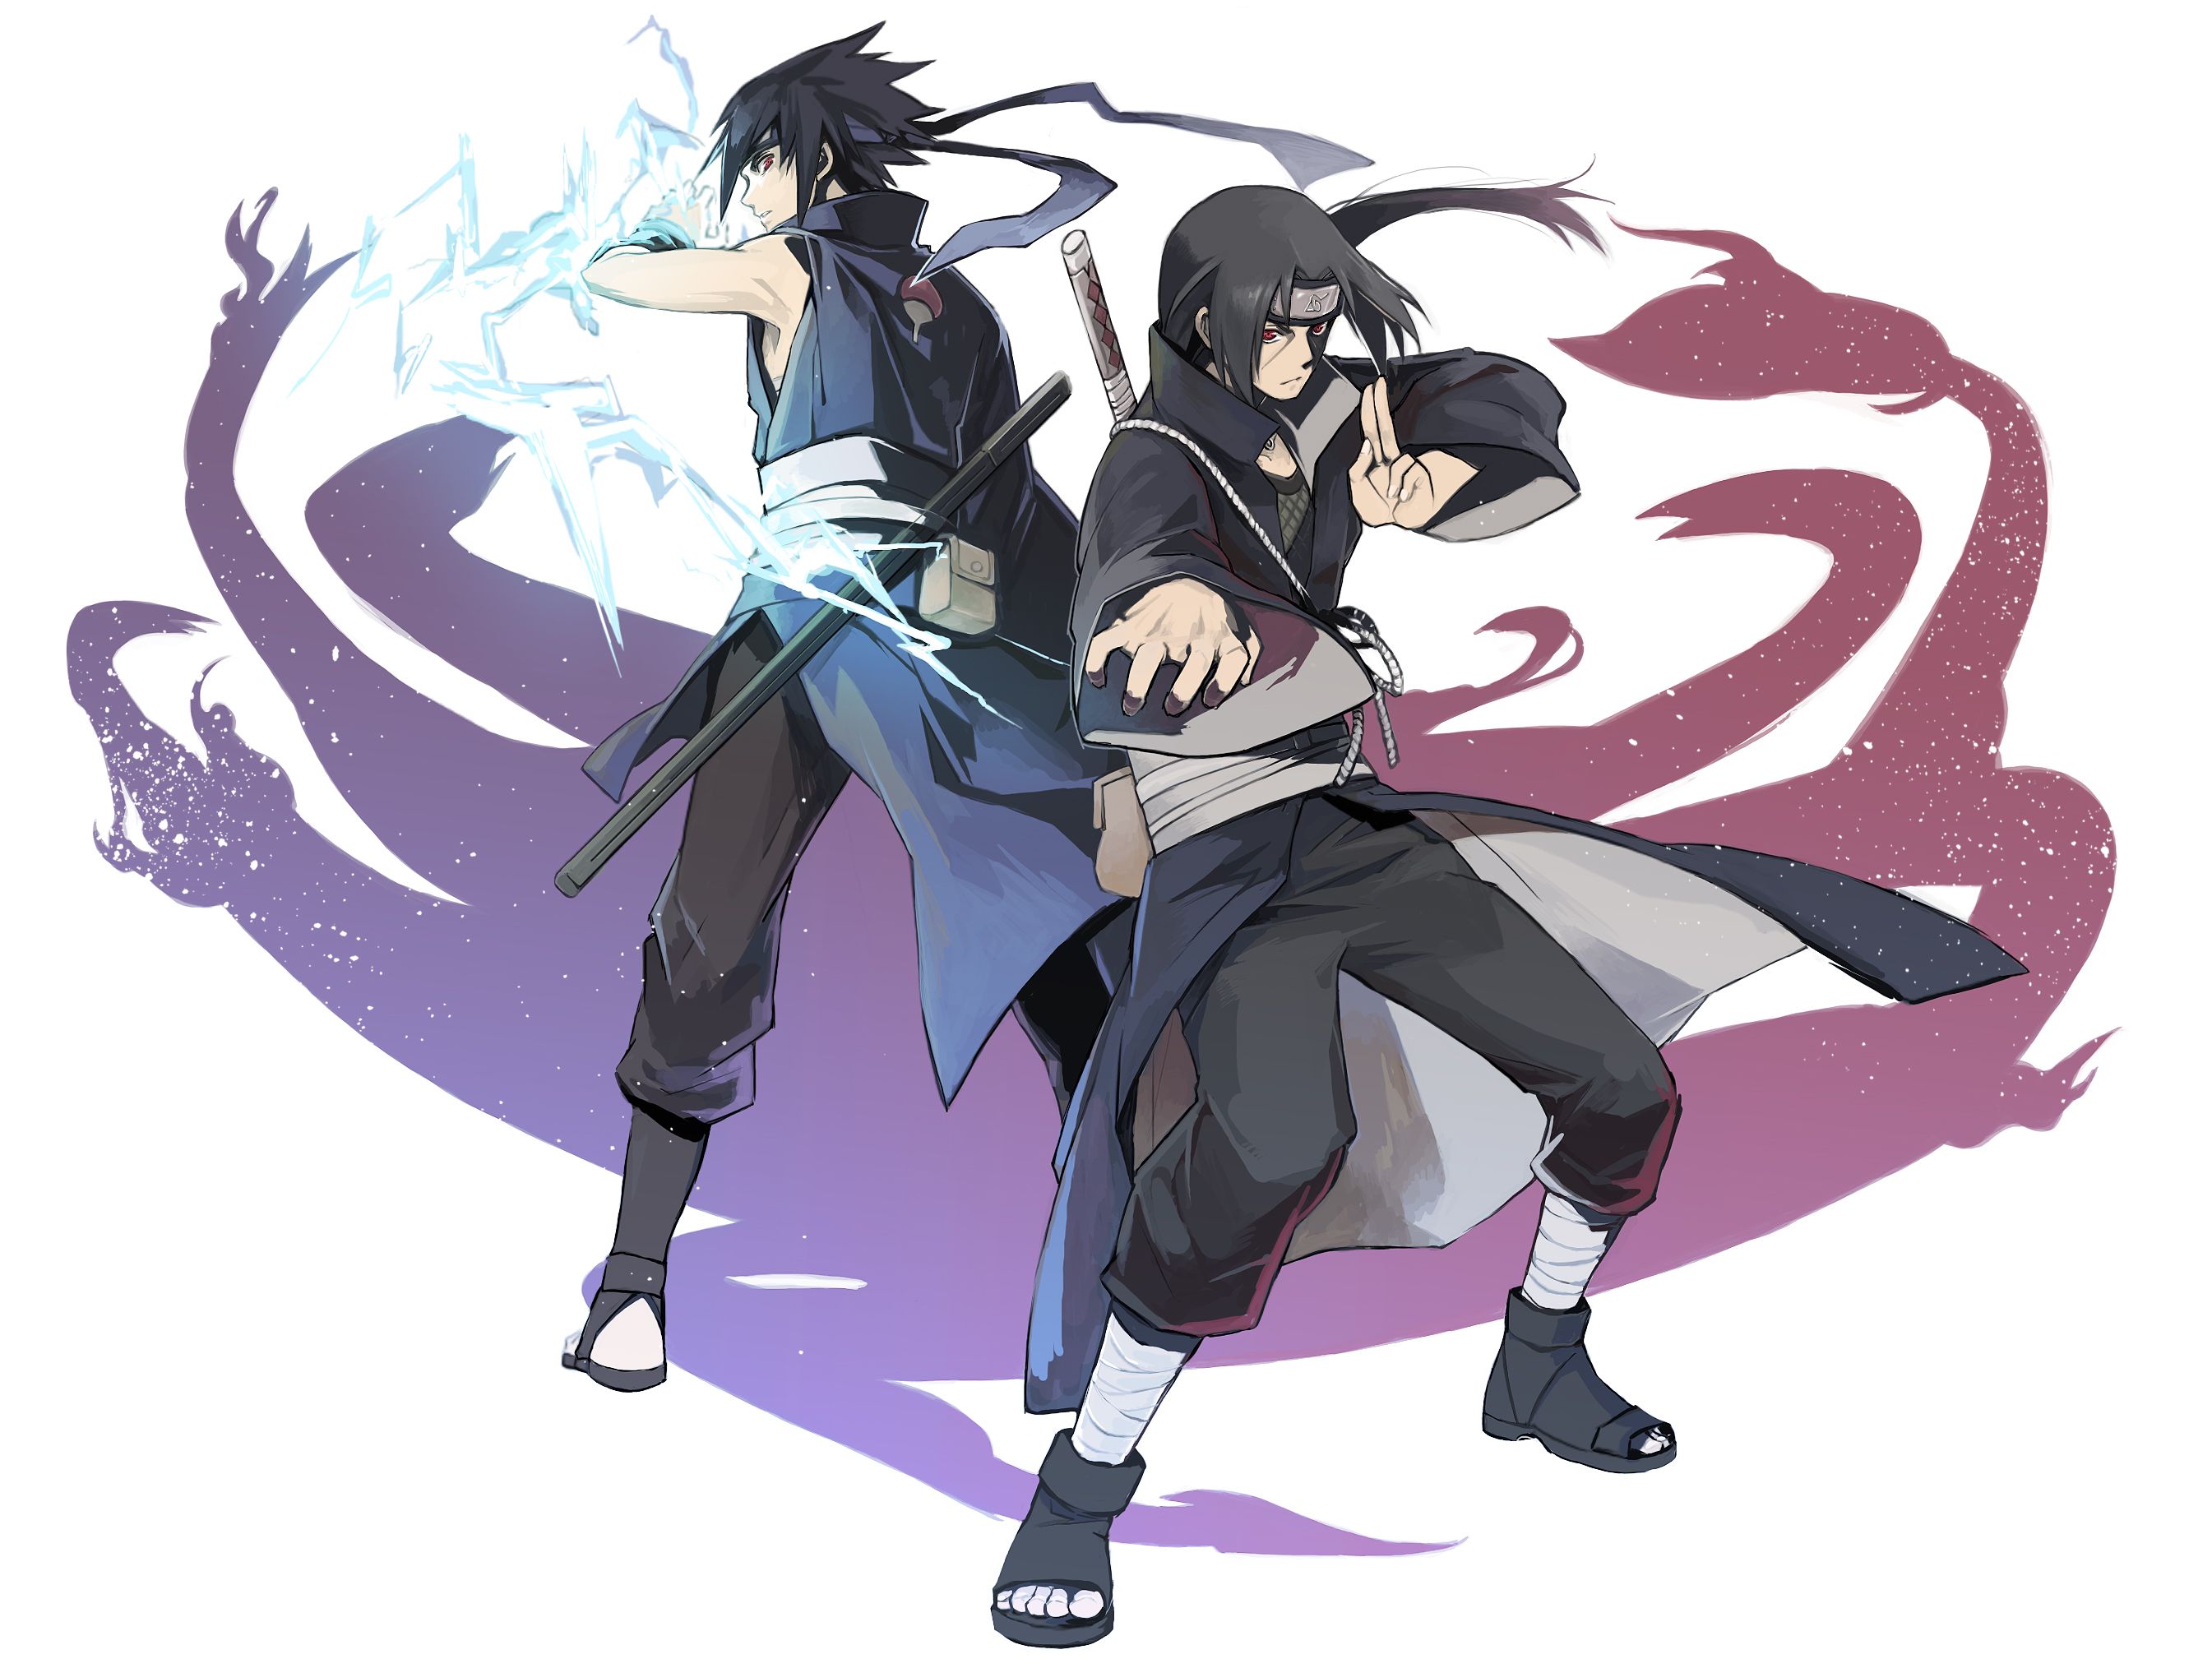 Two anime characters, Sasuke Uchiha and Itachi, engage in a sword fight while a dragon lurks nearby.